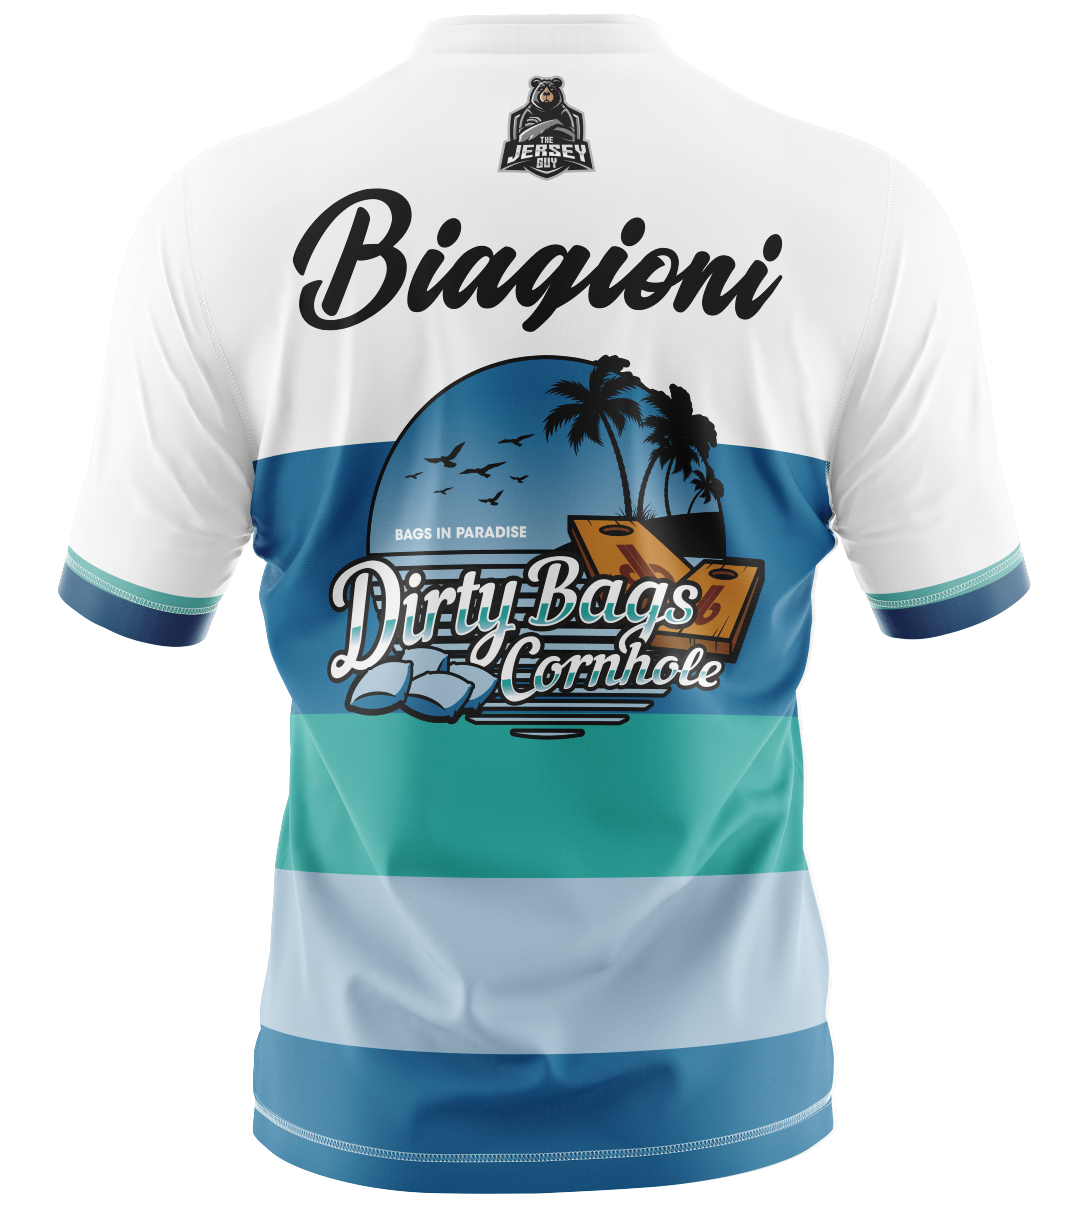 Dirty Bags Cornhole Jersey - "Bags in Paradise" (Blue)